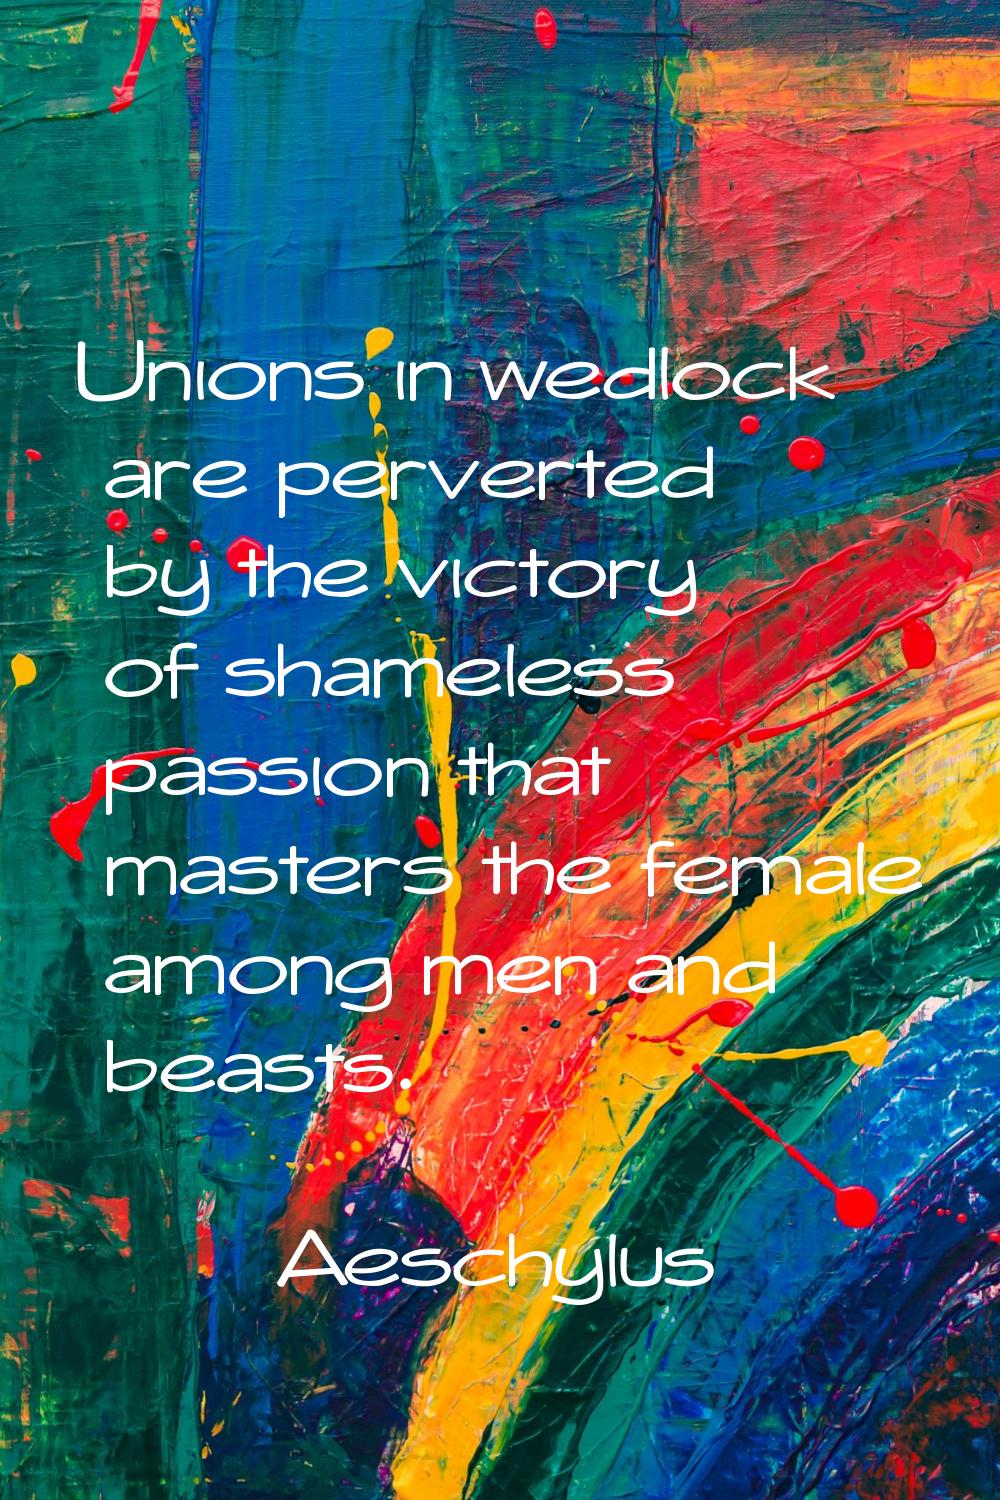 Unions in wedlock are perverted by the victory of shameless passion that masters the female among m